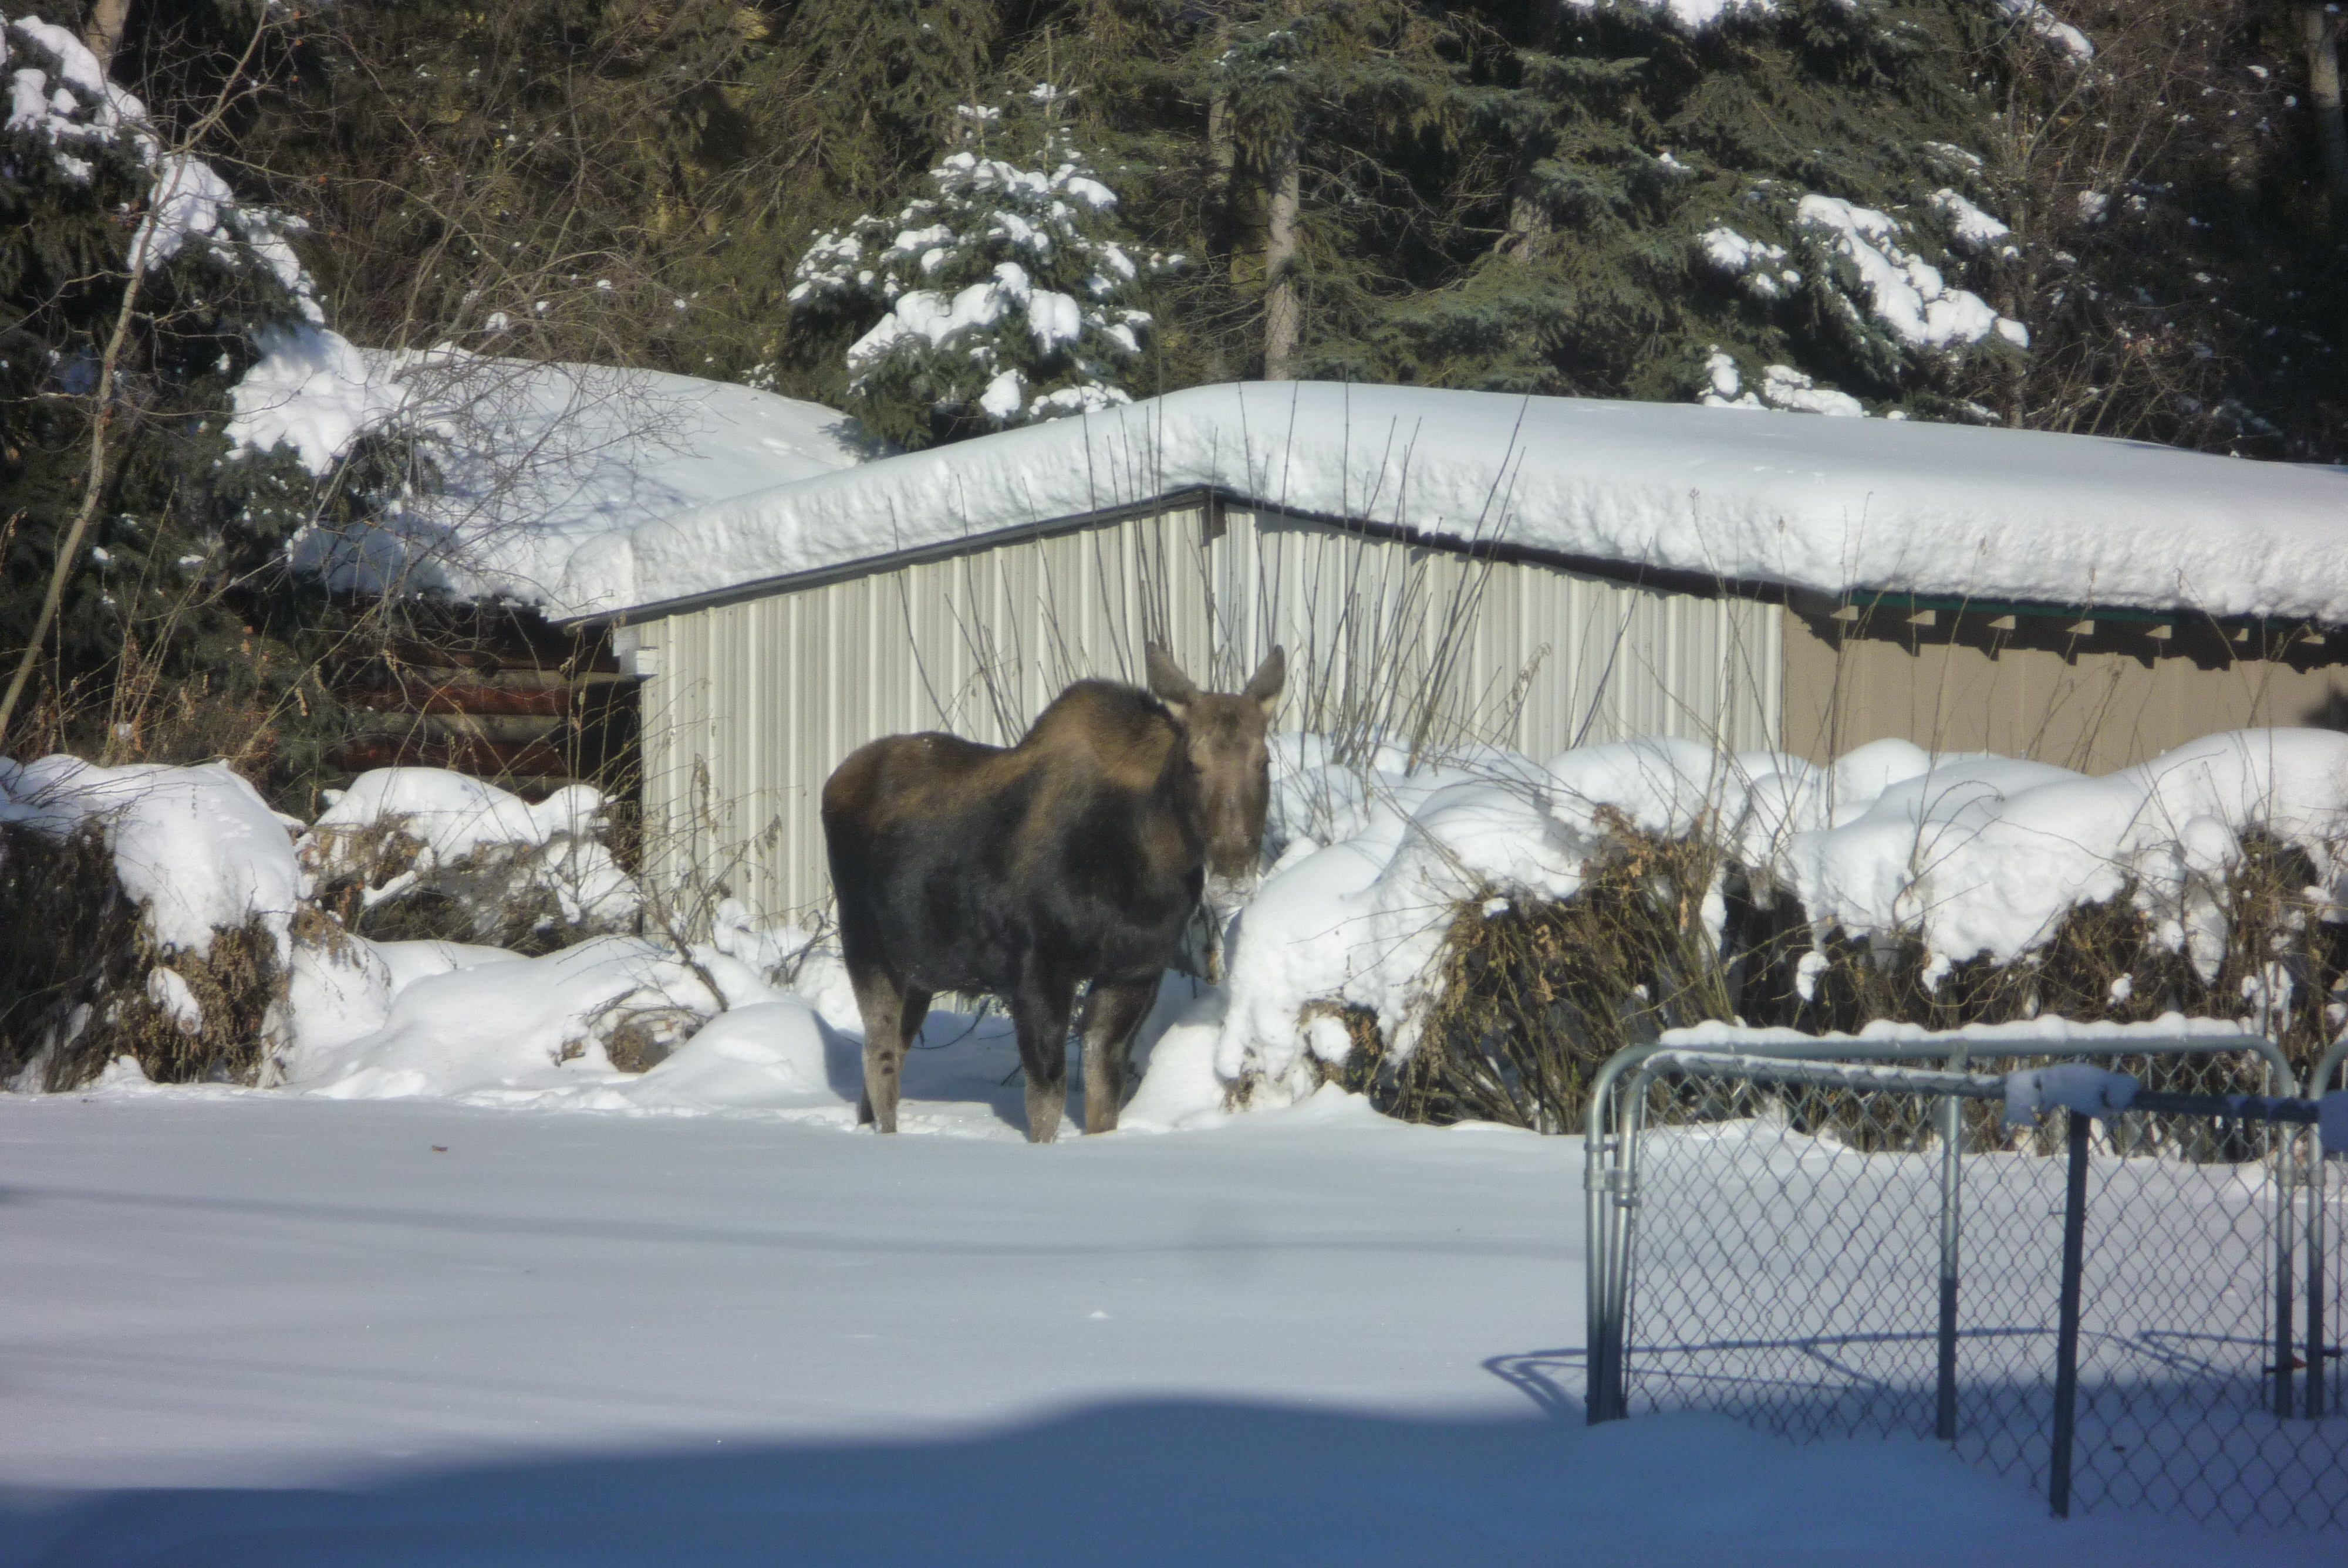 Moose in the area